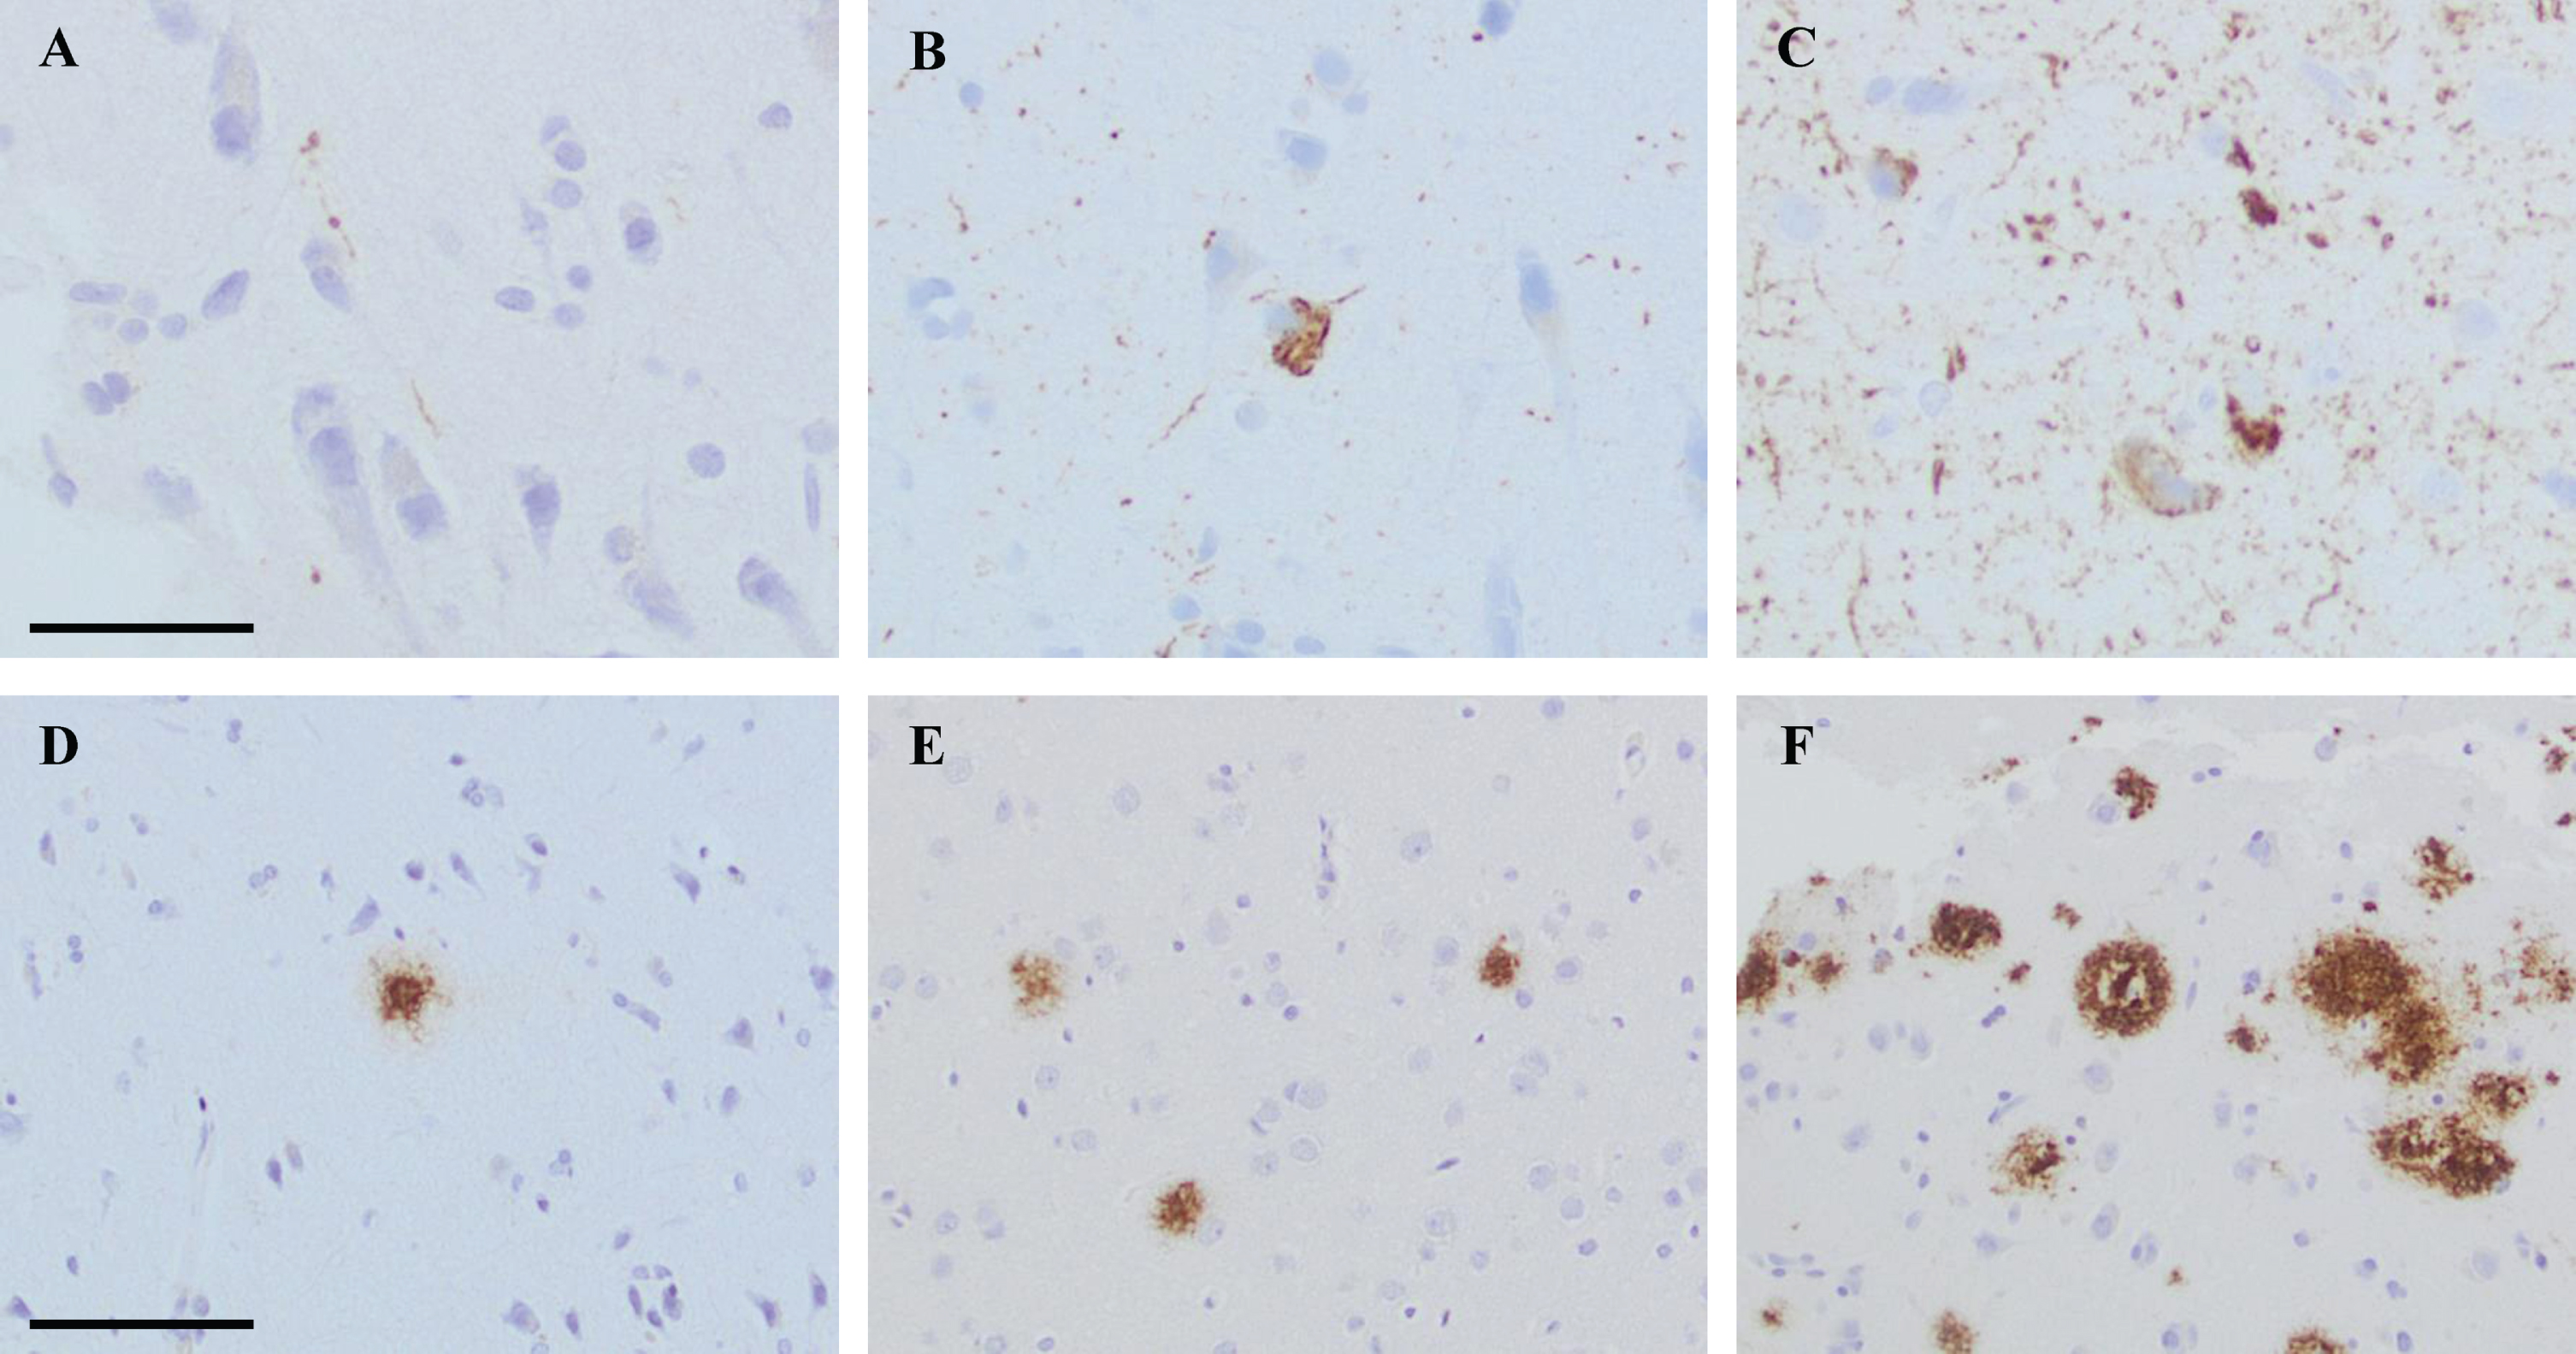 Photos of brain biopsy samples from right frontal cortex, stained by means of immunohistochemistry (IHC). In A-C, IHC outcome at different levels of pathology when applying antibody (Ab) towards hyperphosphorylated tau (HPτ, AT8). In A grade 1 = low level of pathology, in B grade 2 = moderate level of pathology and in C grade 3 = high level of pathology. In D, IHC outcome at grade 1 = low level of pathology when applying Ab towards pyroglutamylated Aβ N3pE. In E and F, IHC outcome at different levels of pathology when applying Ab toward Aβ6F/3D. In E, grade 2 = moderate level of pathology and in F grade 3 = high level of pathology. In A-C, bar 50μm. In D-F bar 100μm.